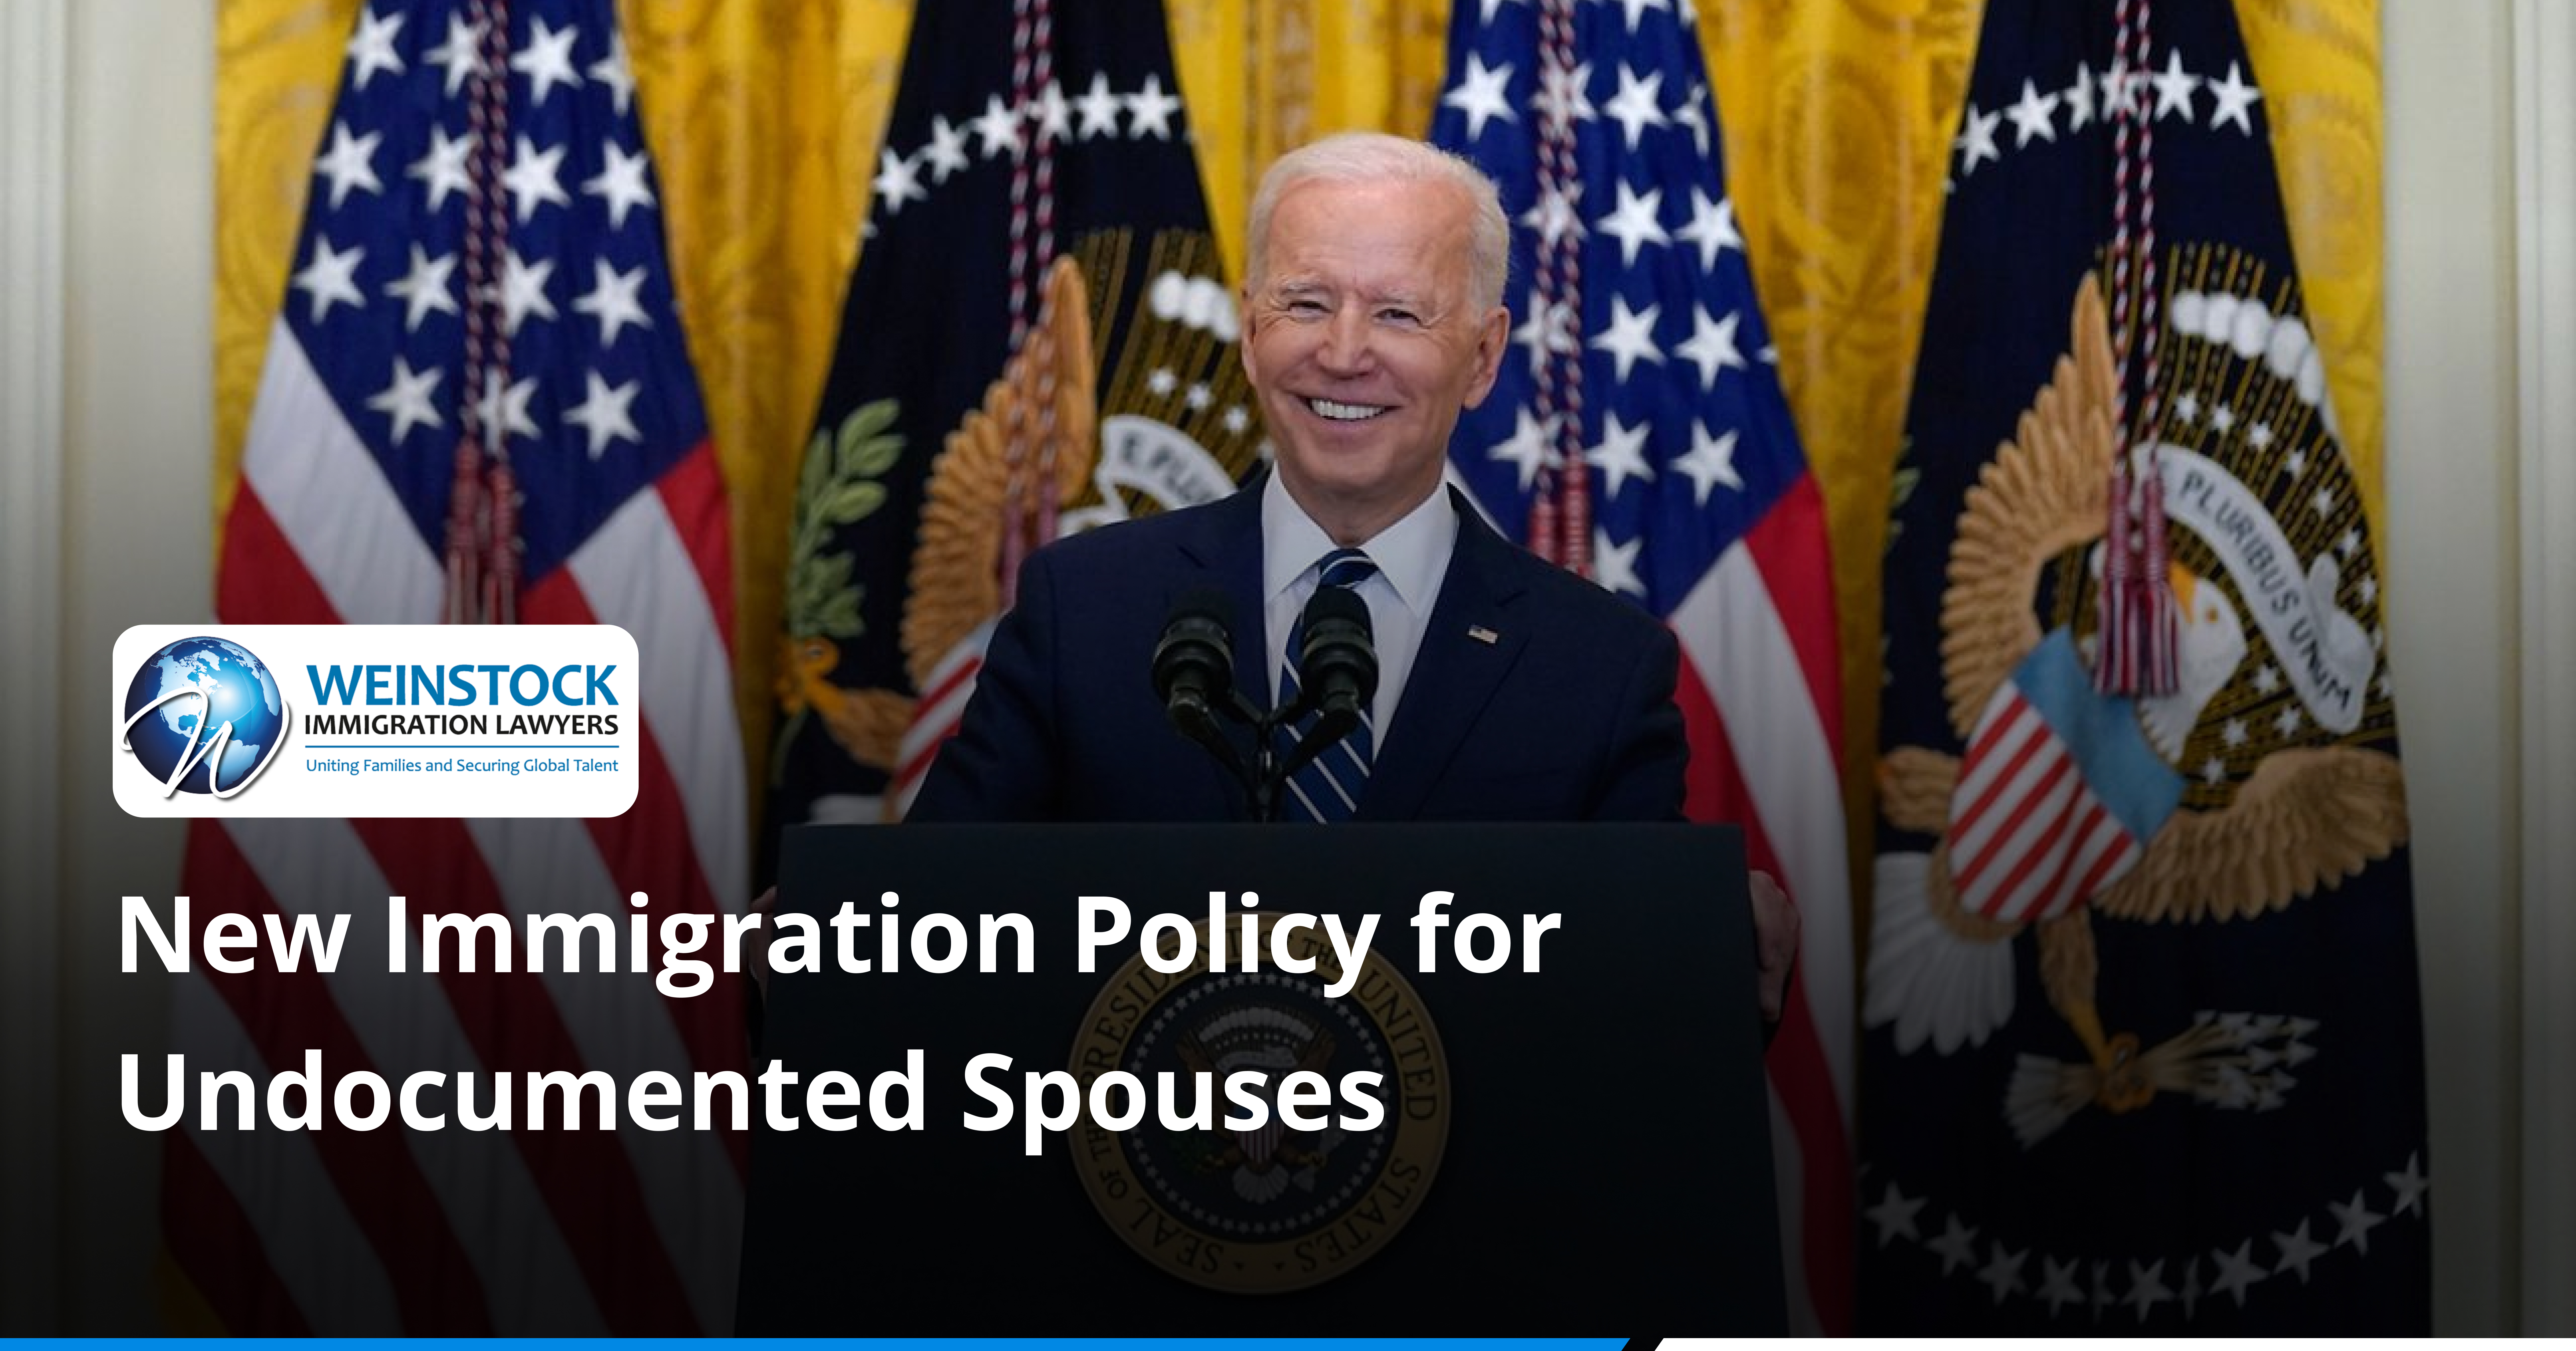 Biden Introduces New Immigration Policy for Undocumented Spouses